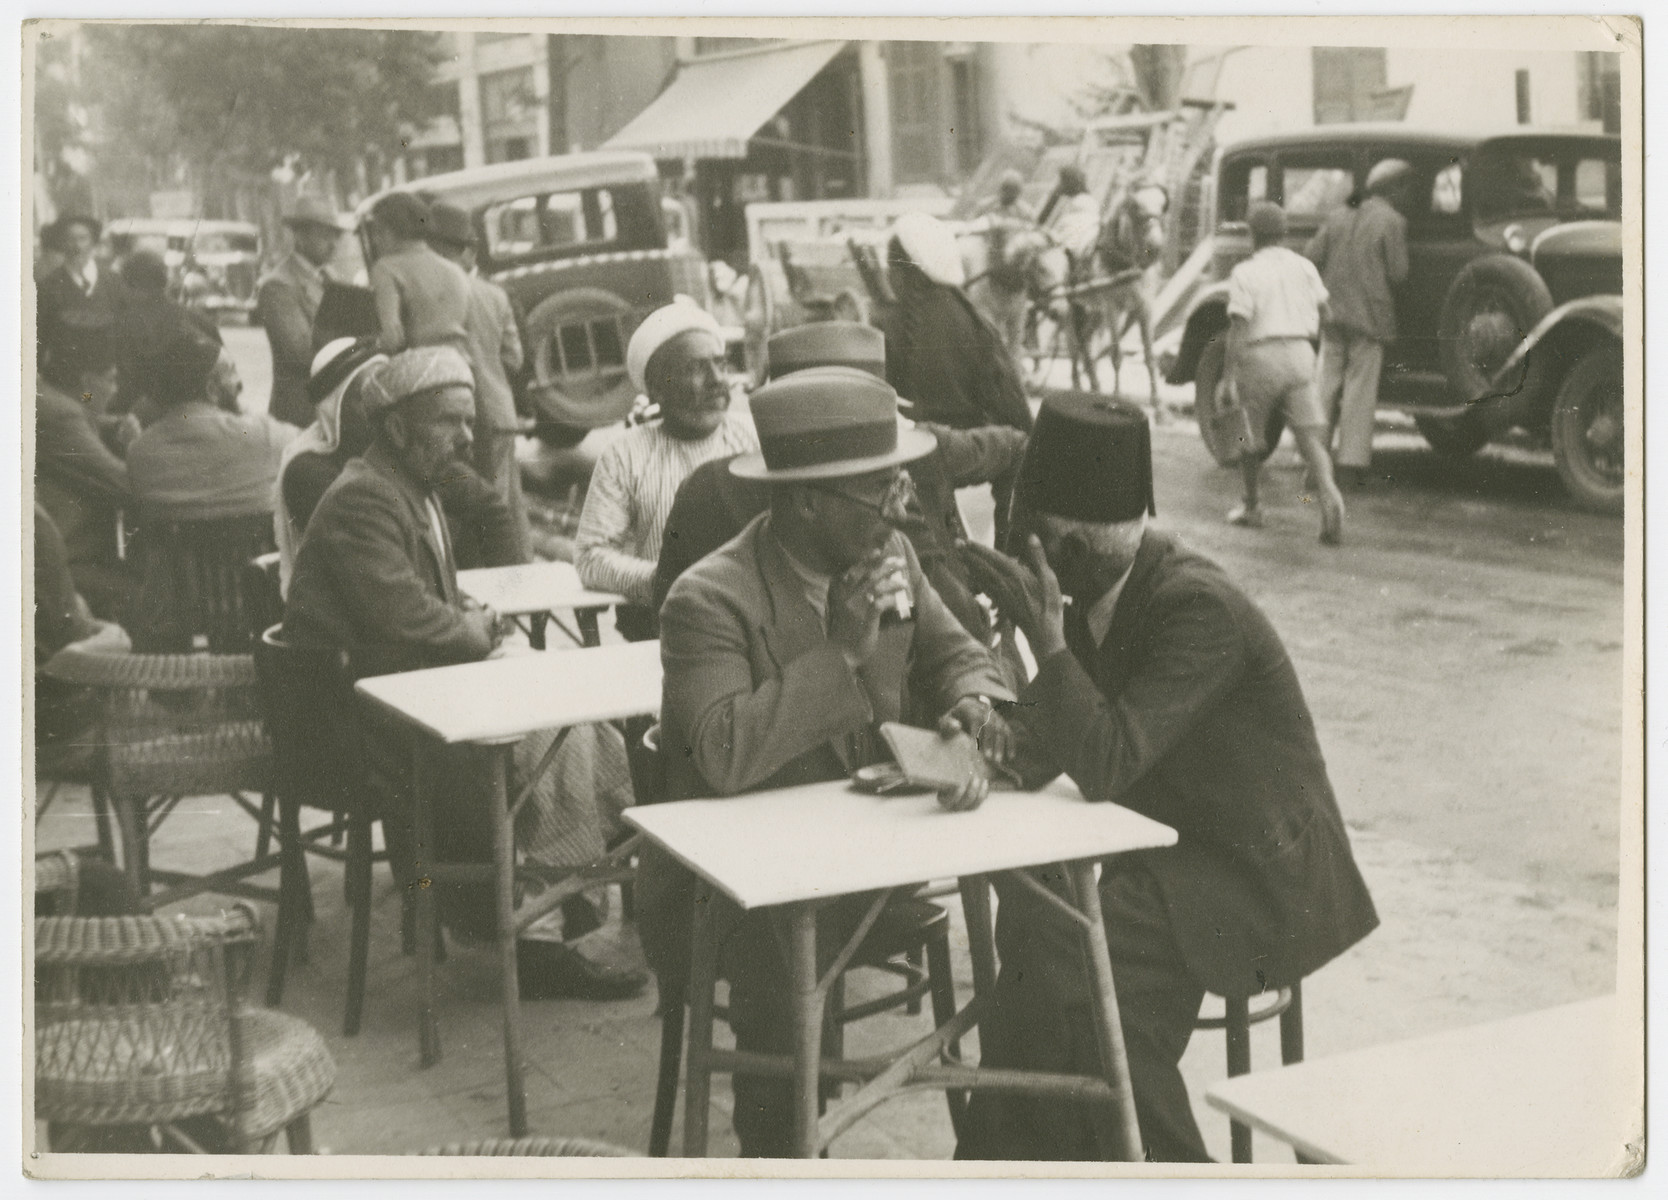 Men sit at sidewalk cafes in Tel Aviv and negotiate land purchases.

Photograph is used on page 182 of Robert Gessner's "Some of My Best Friends are Jews." The pencil inscription on the back of the photograph reads, "Bartering for land."